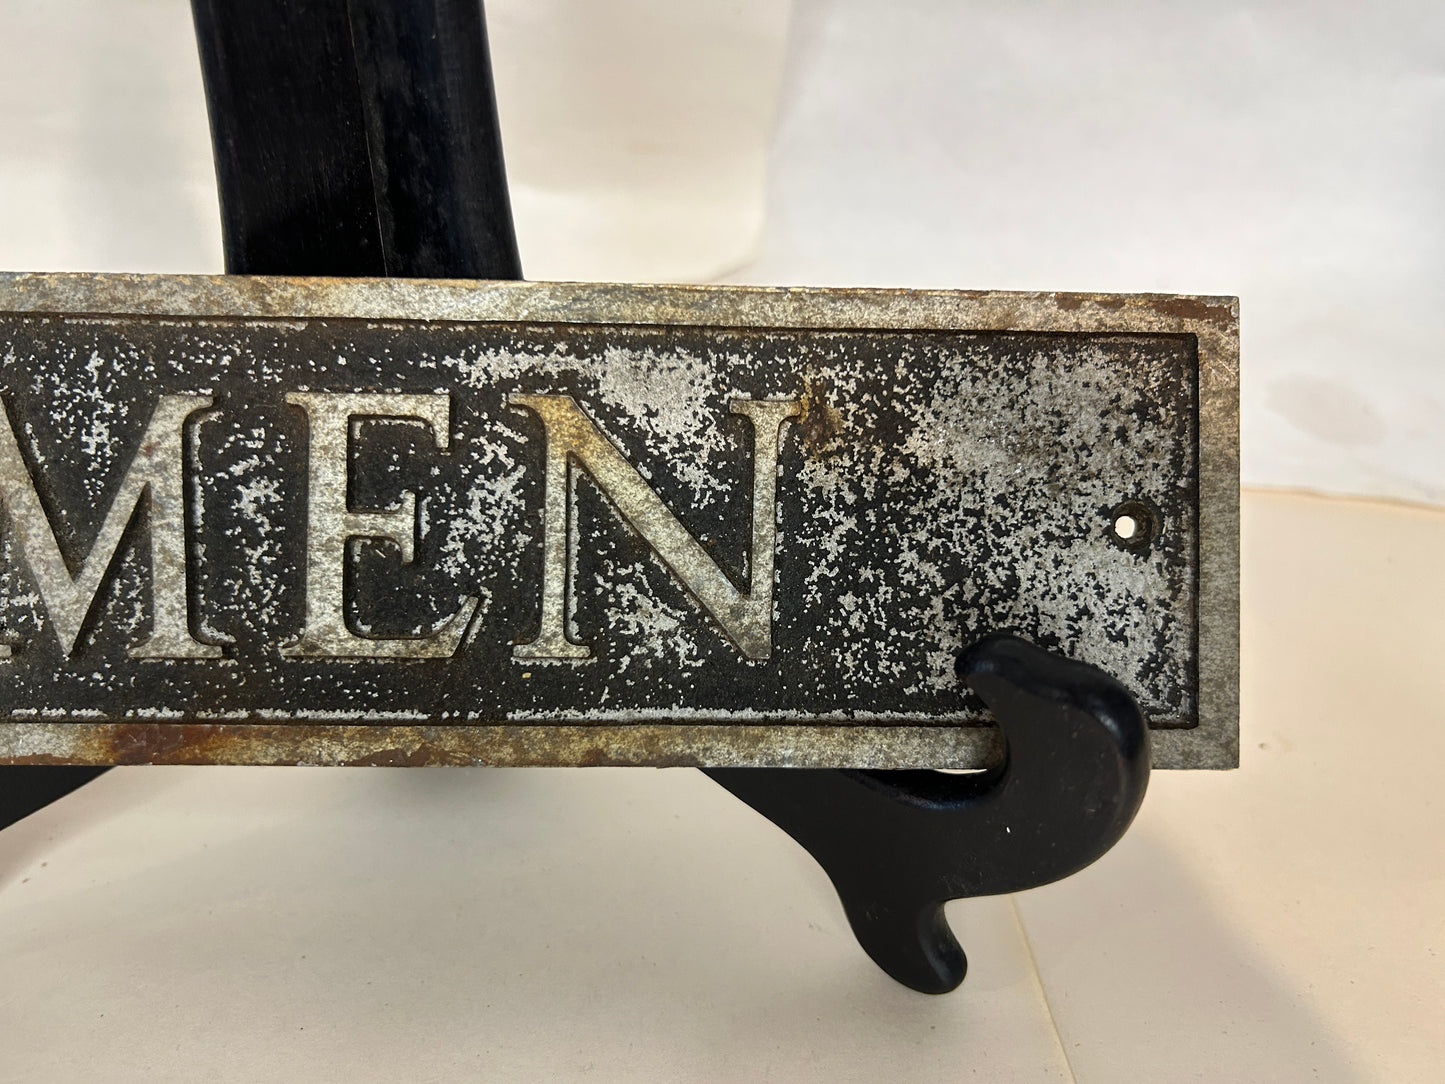 Vintage Cast Iron “MEN” Sign Hangs Flush to the Wall